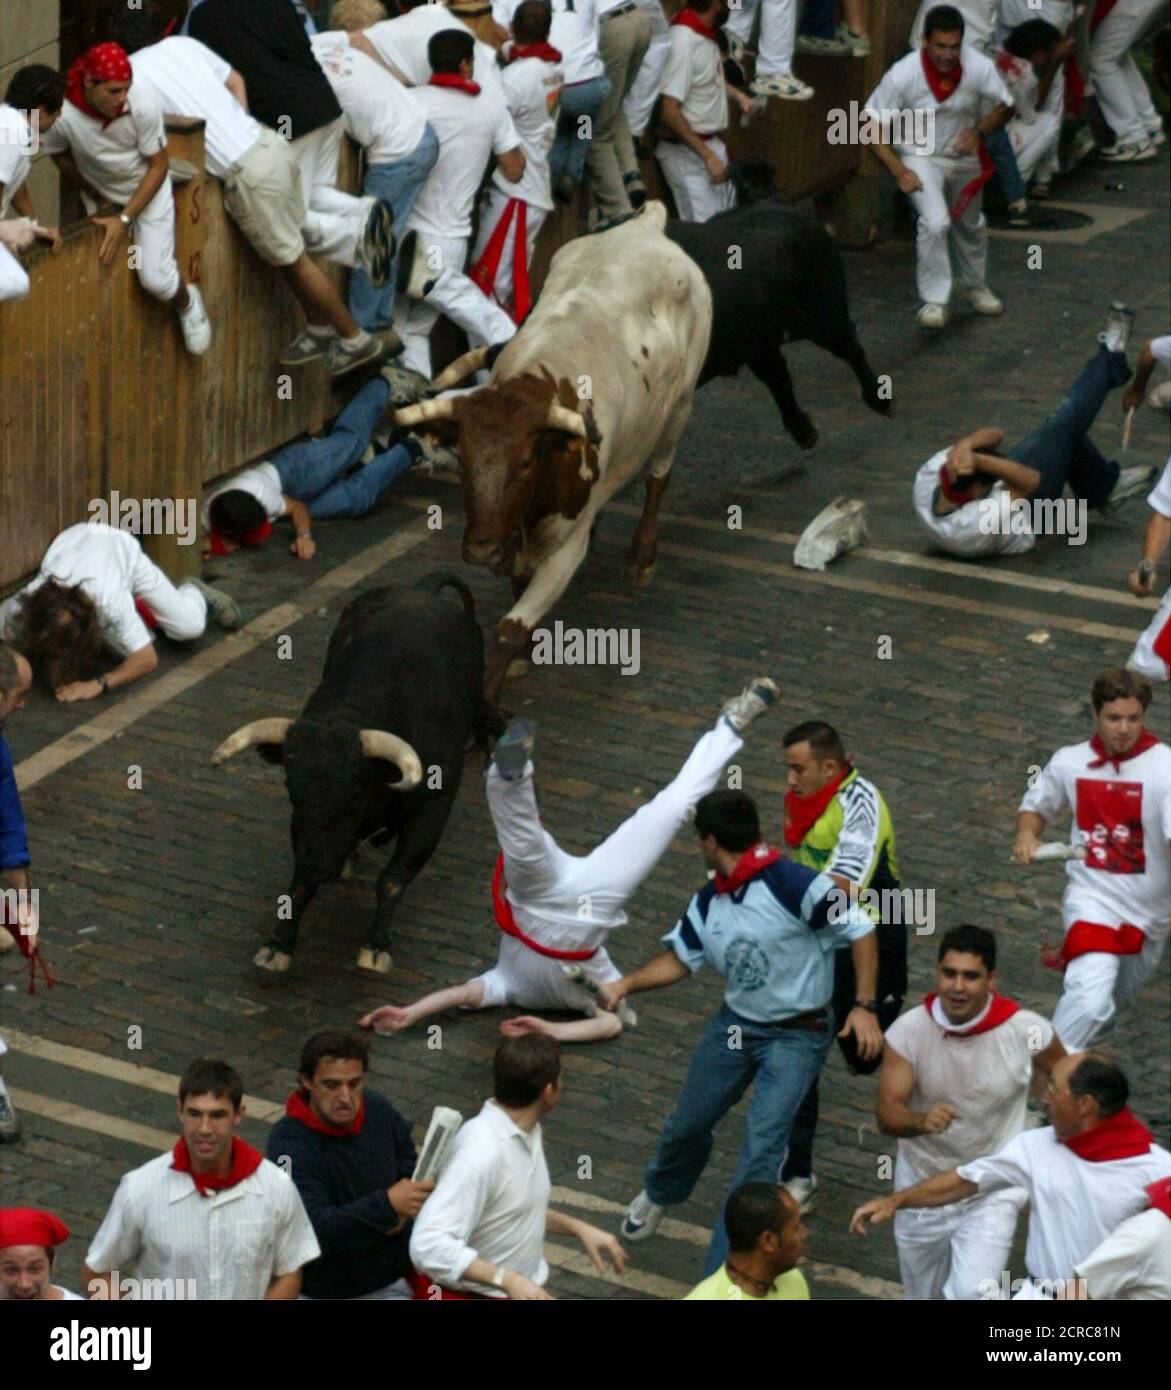 British bull runner David Bigging lands upside down after being gored and tossed by a bull during the sixth running of the bulls of the San Fermin festival in Pamplona on July 12, 2003. A pack of six fighting bulls and steers runs through the centre of the town to the bullring every morning during the week long festival made famous by U.S. writer Ernest Hemingway. Bigging suffered a 10 centimetre (four inch) wound in his upper right thigh as well as a blow to the head, but was not in serious condition, the Navarra regional government said REUTERS/Paul Hanna  PH/JV Stock Photo